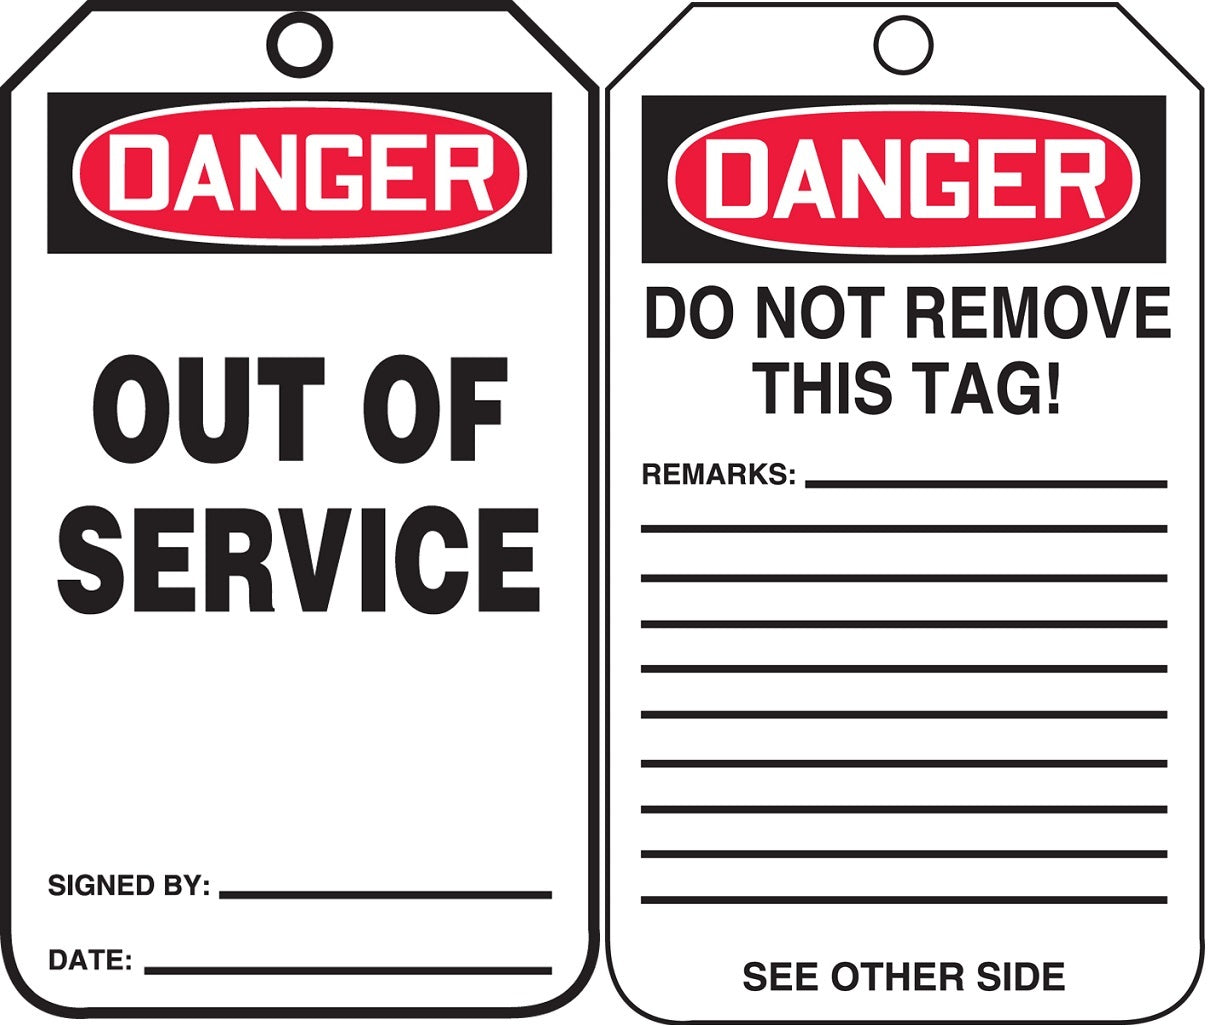 5 3/4" X 3 1/4" Red, Black And White 10 mil PF-Cardstock English Safety Tag "DANGER OUT OF SERVICE/DANGER DO NOT REMOVE THIS TAG! REMARKS …" With 3/8" Plain Hole And Standard Back B